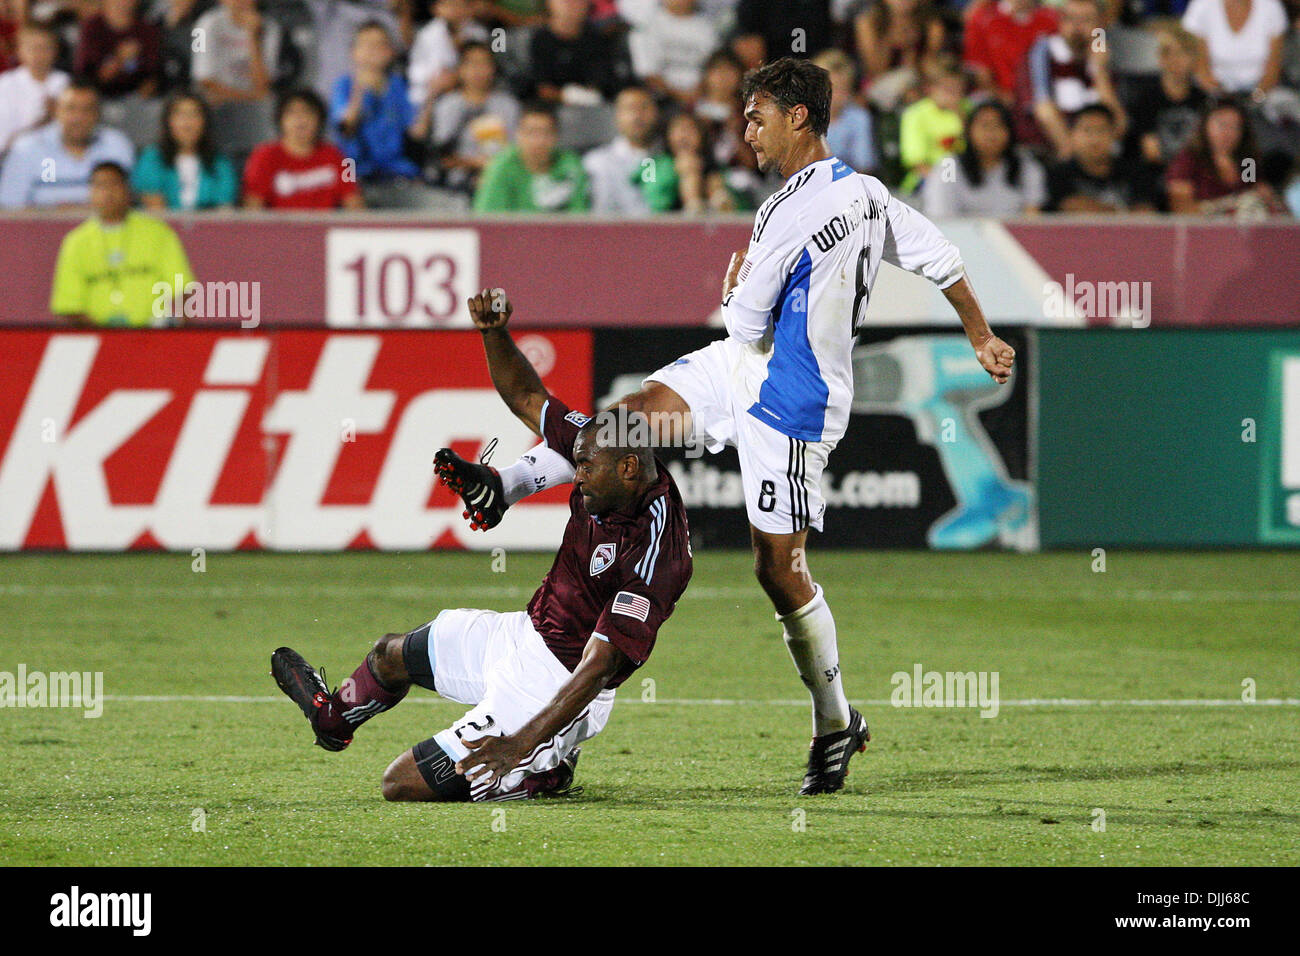 August 7, 2010: Colorado defender MARVELL WYNNE (22) gets in the way of San Jose forward CHRIS WONDOLOWSKI (8) at Dick's Sporting Good Park in Commerce City, Colorado. The Colorado Rapids won the game 1-0. (Credit Image: © Paul Meyer/Southcreek Global/ZUMApress.com) Stock Photo